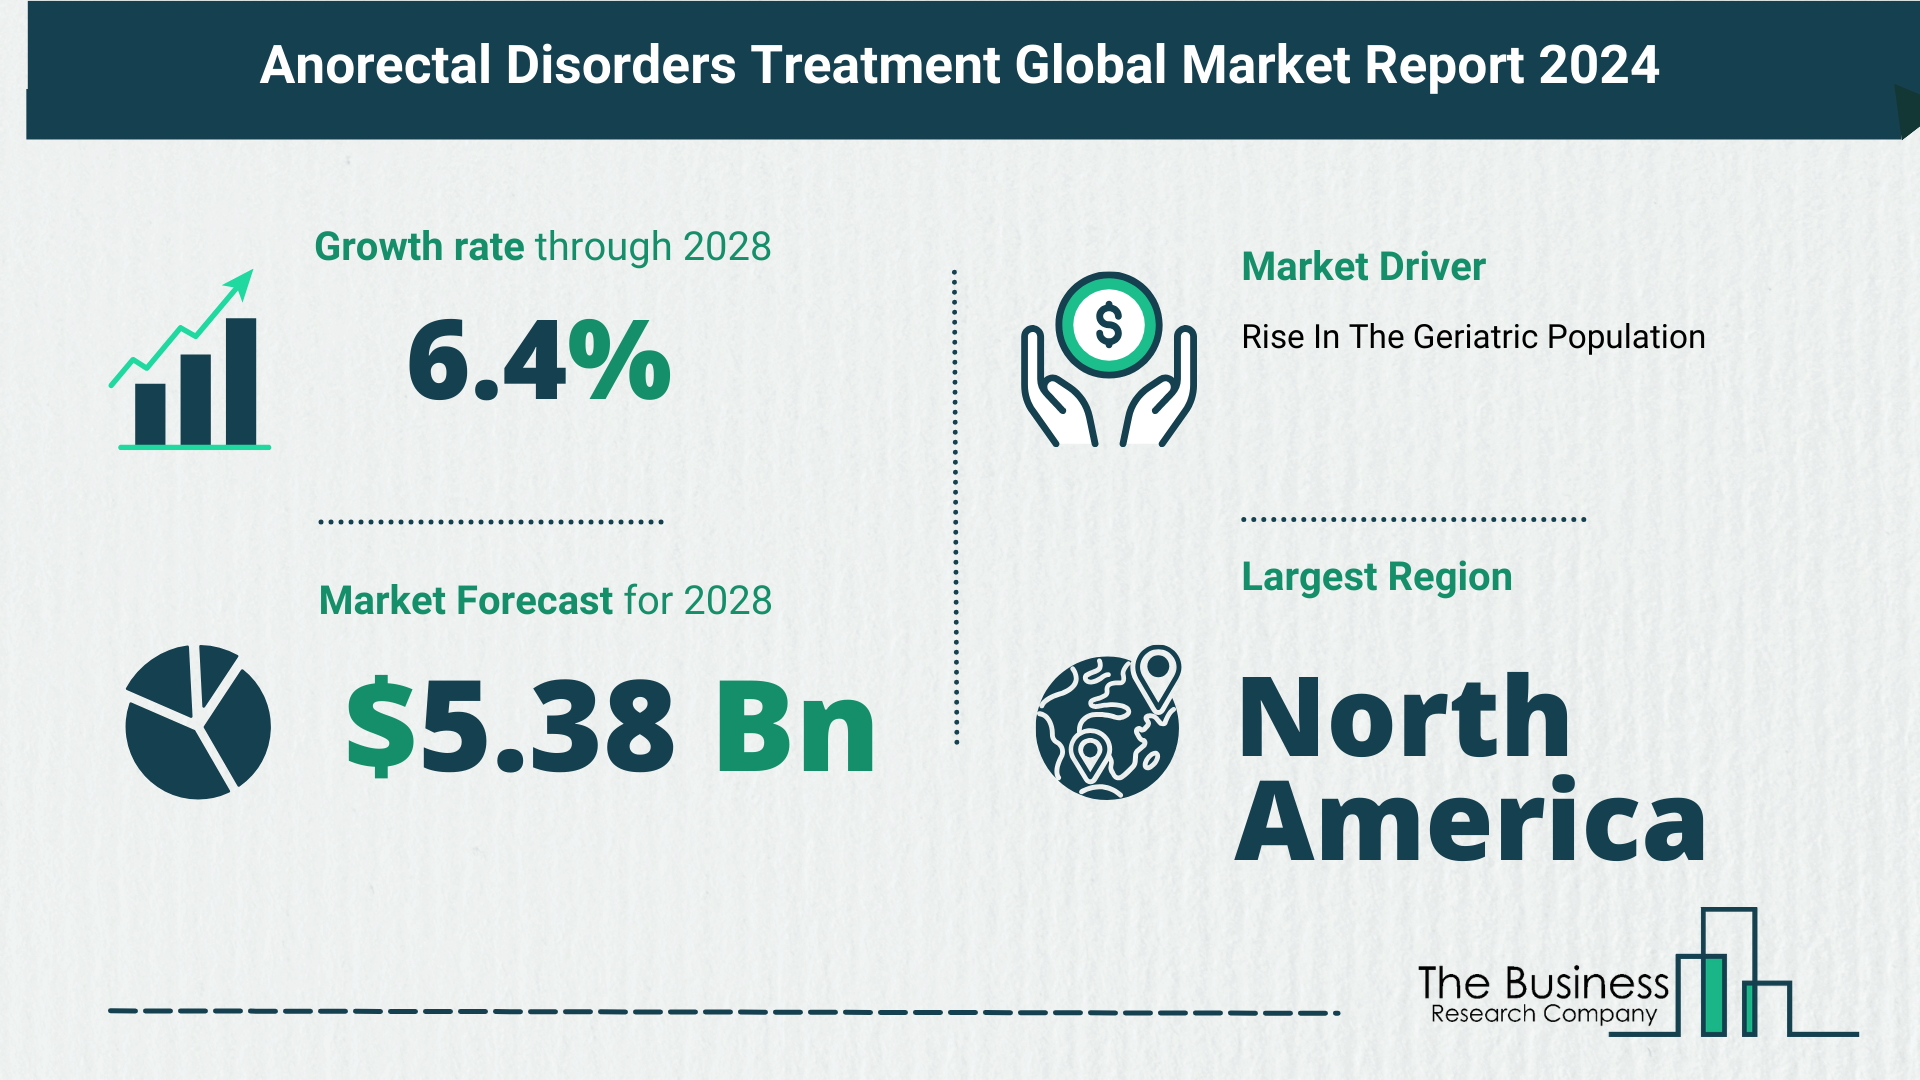 Global Anorectal Disorders Treatment Market